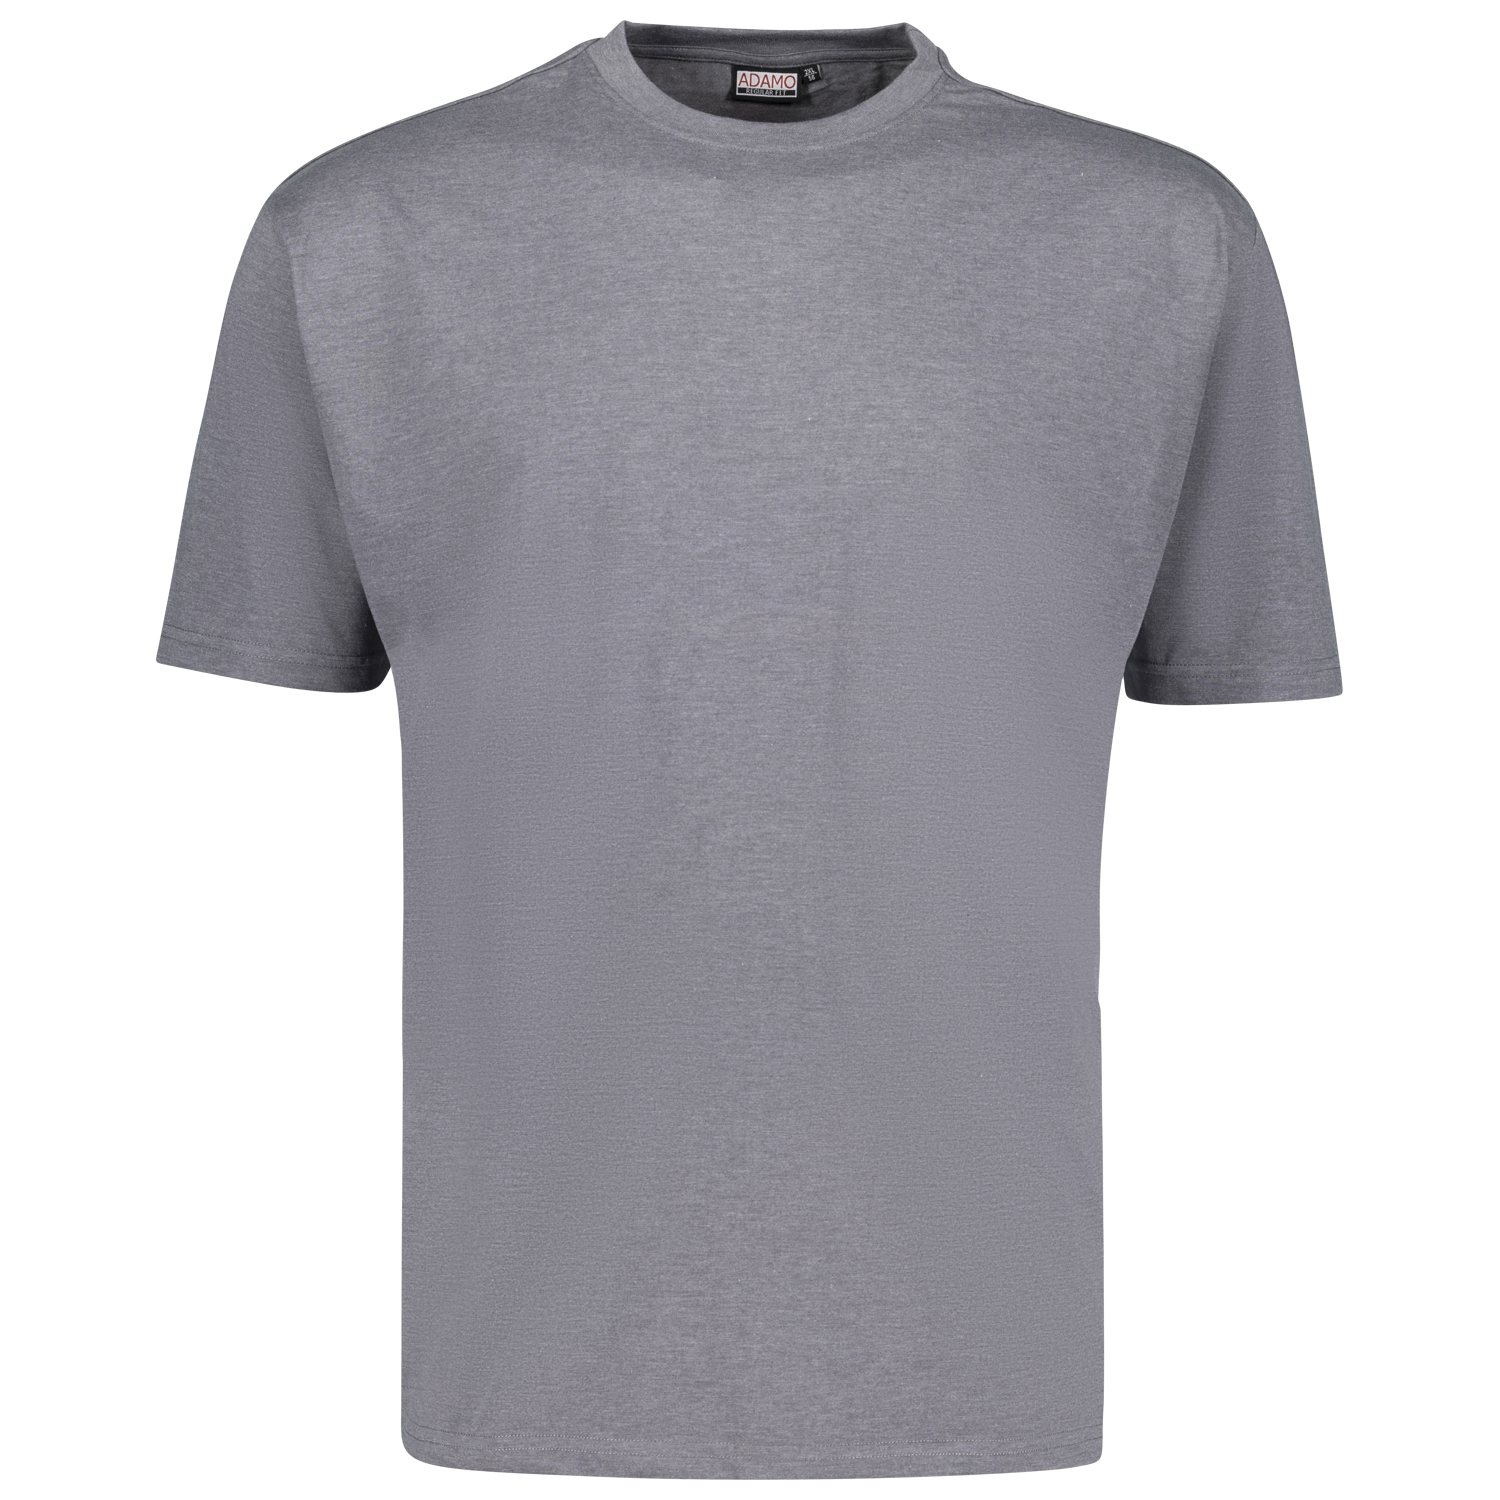 T-shirts in ashgrey series Kevin regular fit by Adamo for men up to oversize 12XL